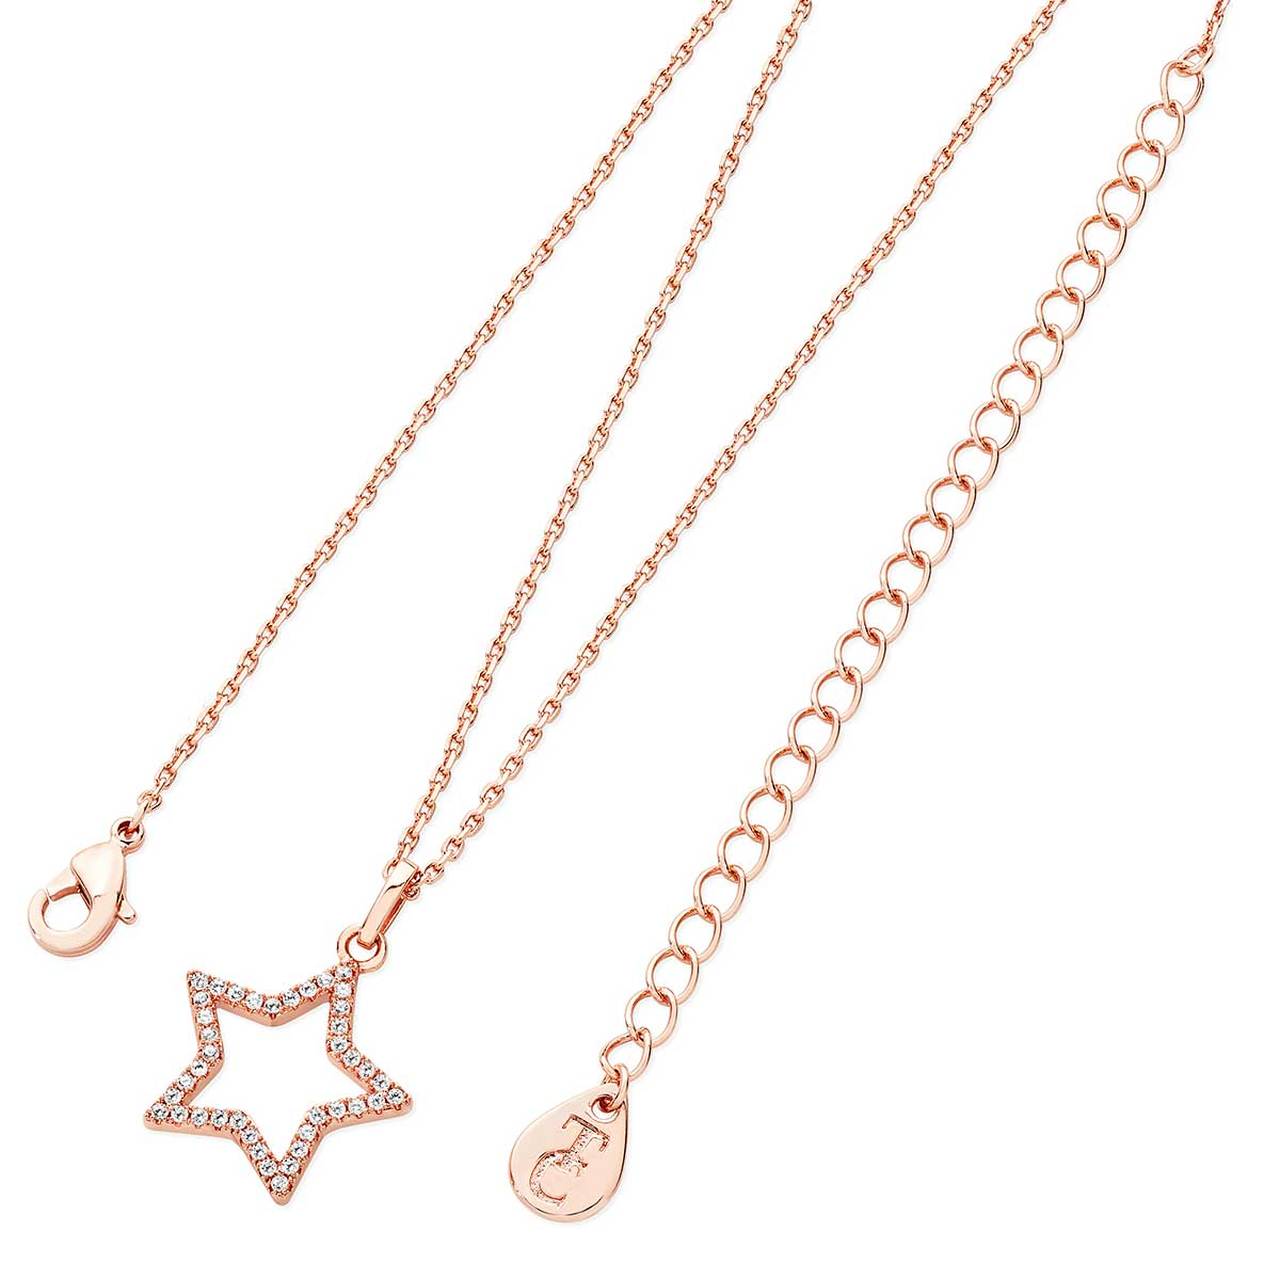 Tipperary Crystal Star Pendant Open Rose Gold  Fashioned in rose gold this elegant open star pendant captivates with one row of scintillating clear crystals cut to enhance their brilliance and shine. Simple yet sophisticated, this pendant is buffed to a brilliant lustre and is suspended centred from a cable chain which secures safely with a lobster claw clasp.